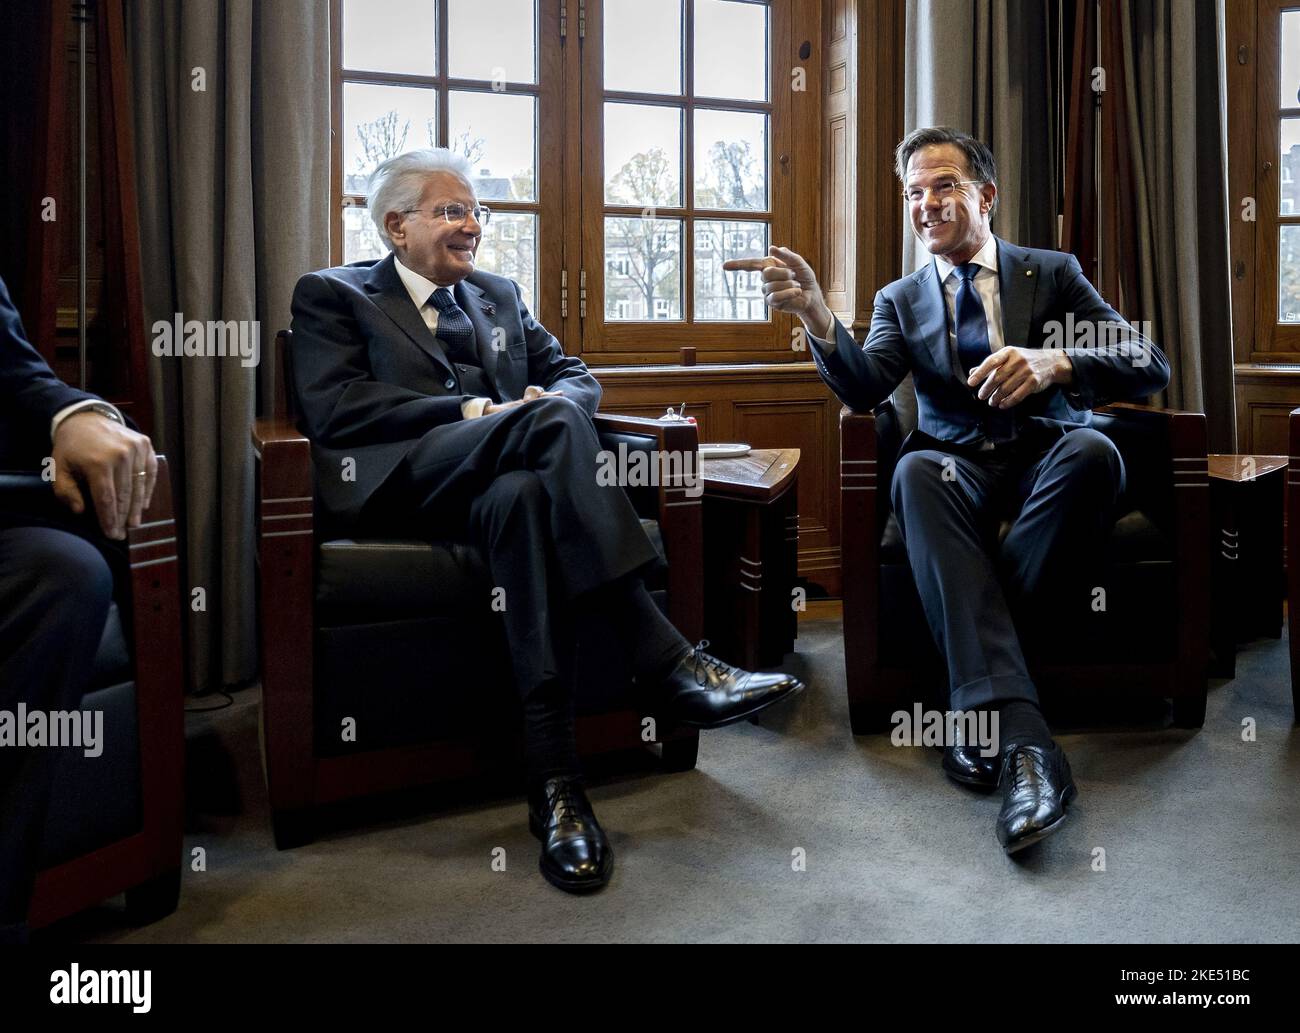 2022-11-10 13:06:22 Dutch Prime Minister Mark Rutte (R) meets Italian President Sergio Mattarella in his office (the Torentje) in The Hague, The Netherlands, November 10, 2022. The Italian president is paying a three-day state visit to the Netherlands. ANP REMKO DE WAAL netherlands out - belgium out Stock Photo